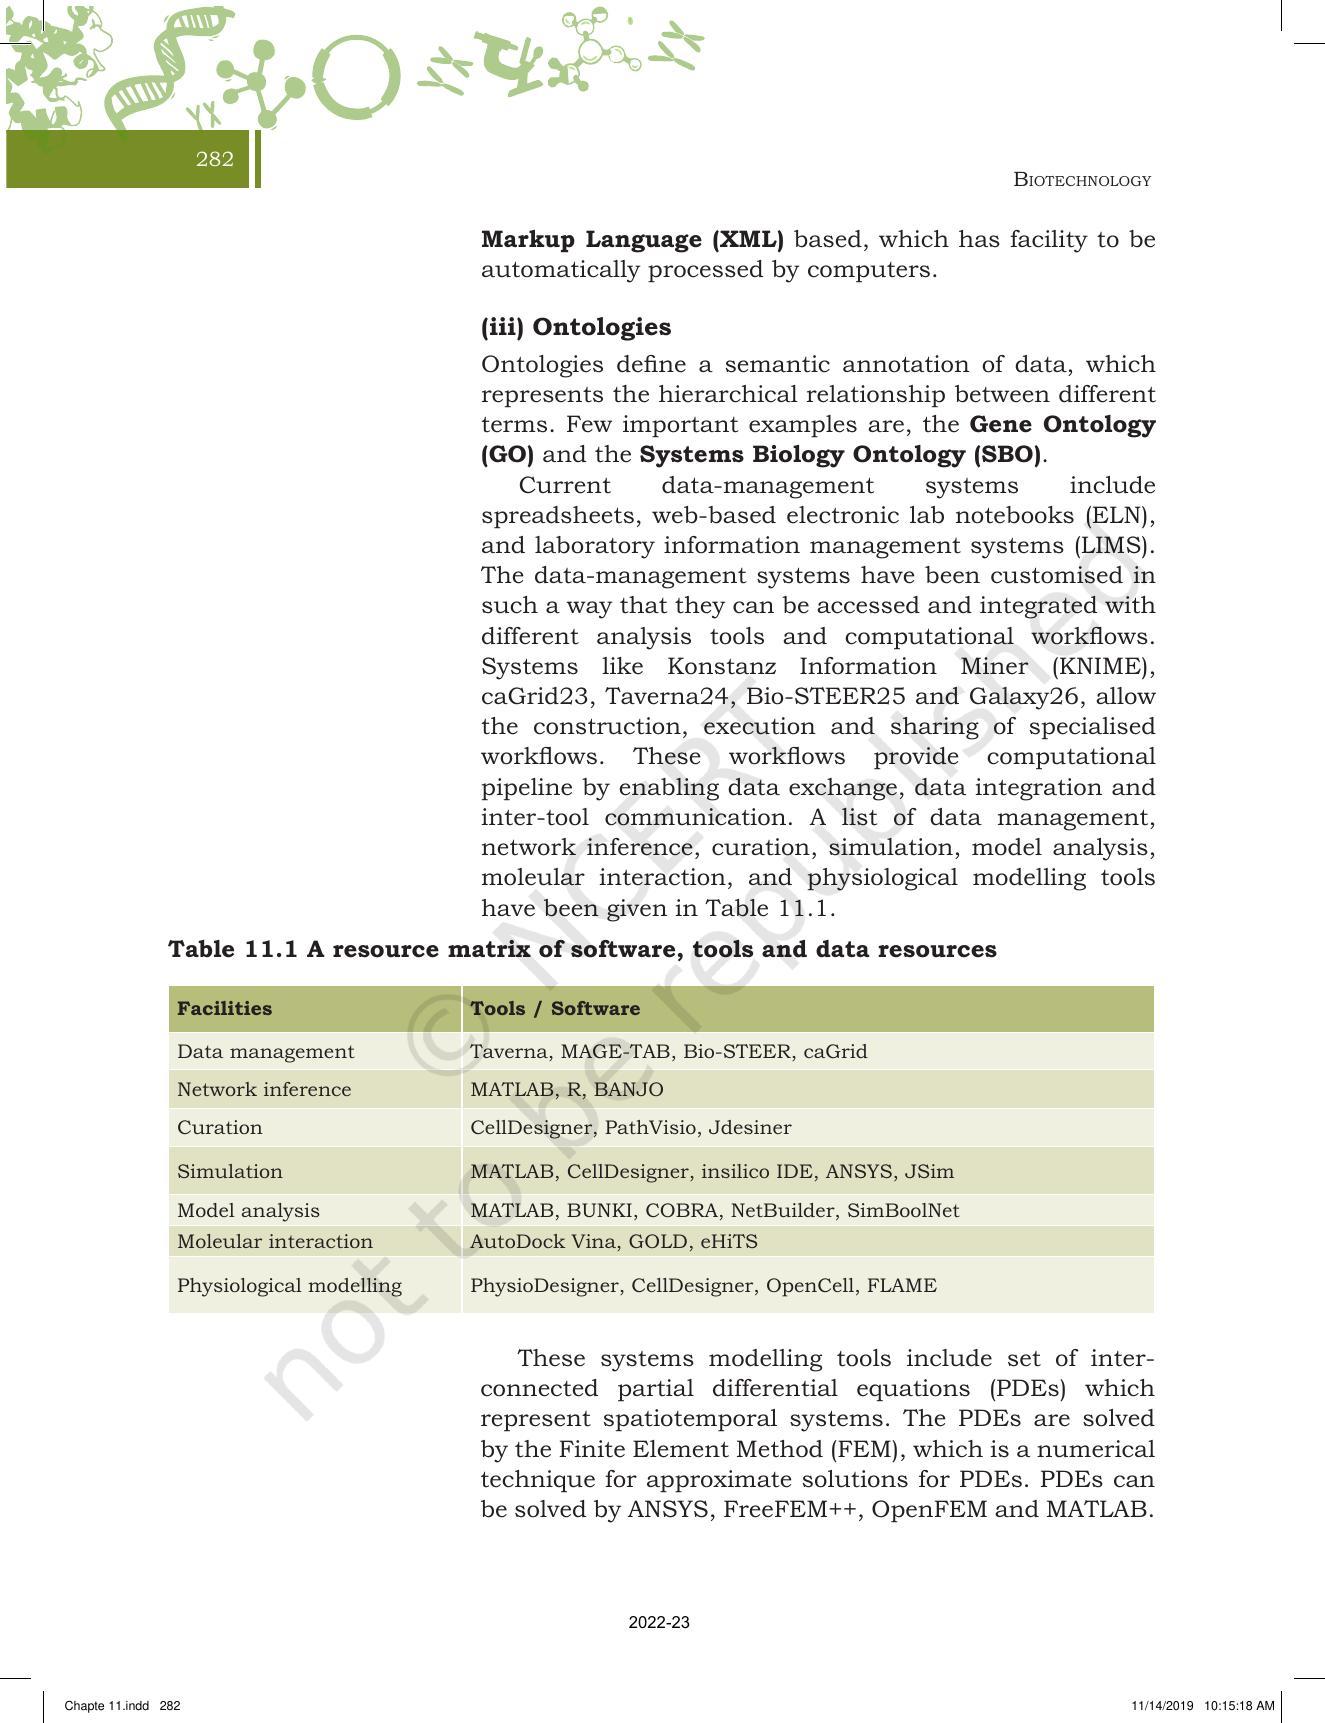 NCERT Book for Class 11 Biotechnology Chapter 11 Programming and Systems Biology - Page 7